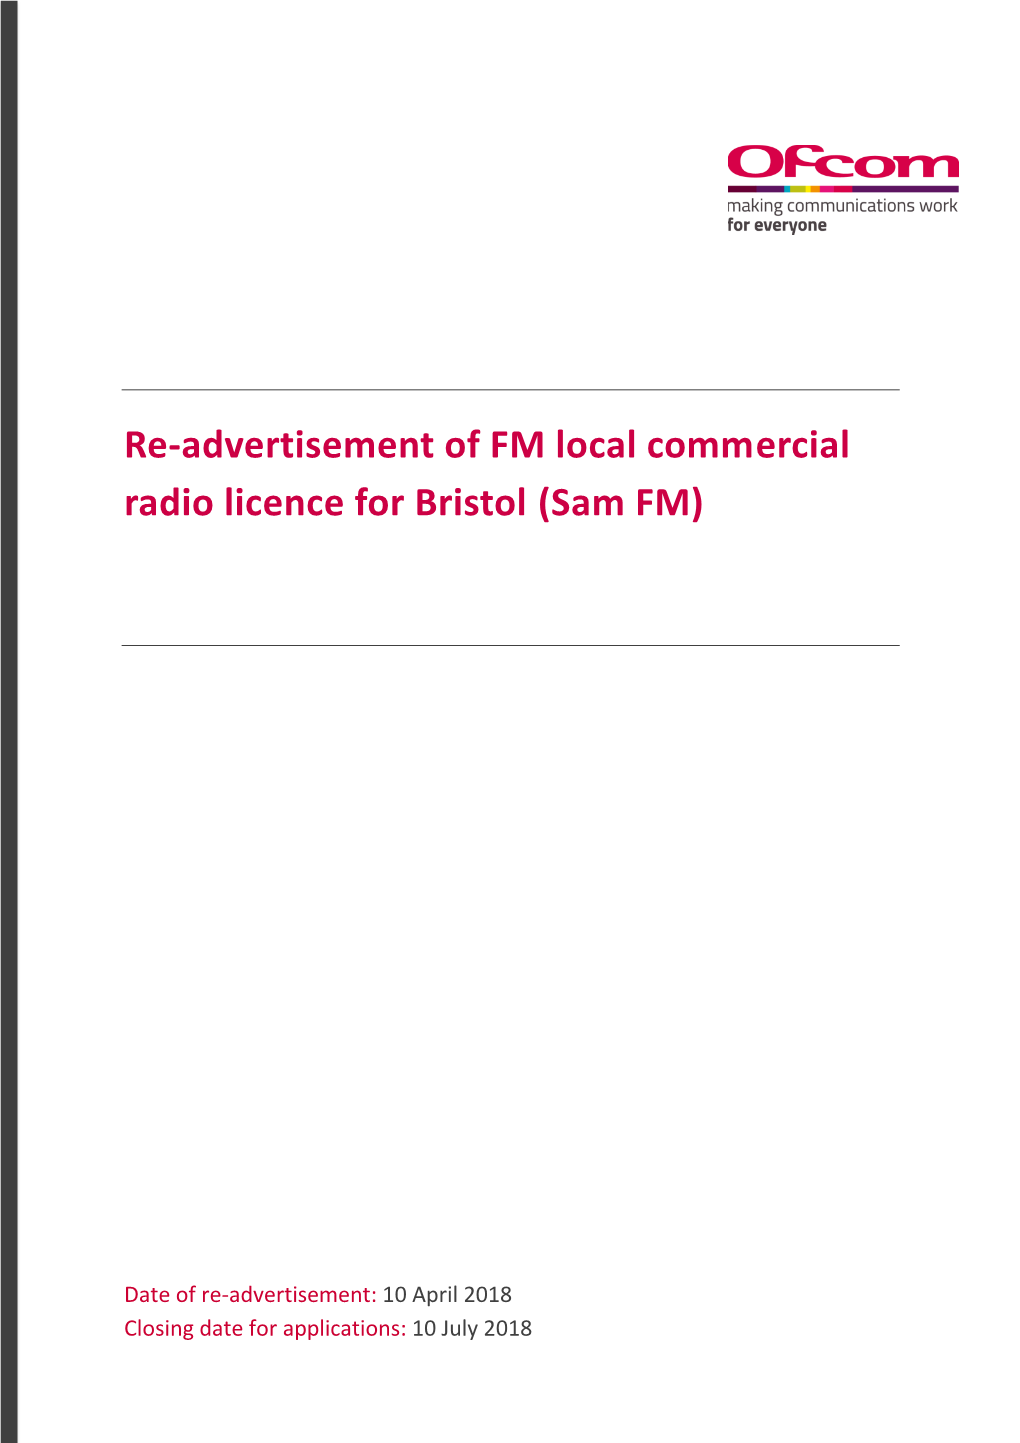 Re-Advertisement of FM Local Commercial Radio Licence for Bristol (Sam FM)